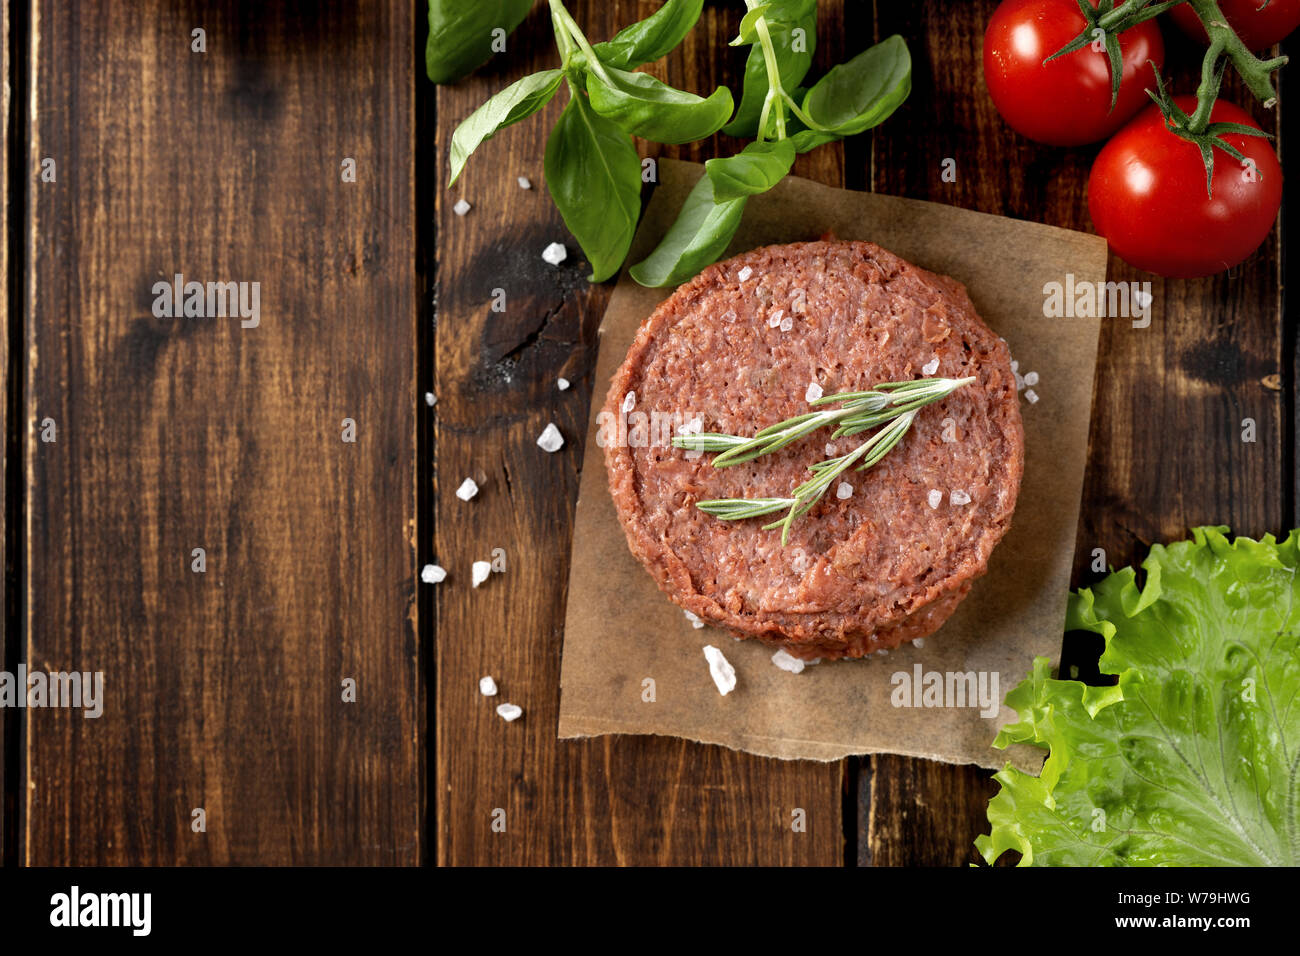 Top view of raw vegan patty on dark wooden background. Copy space Stock Photo